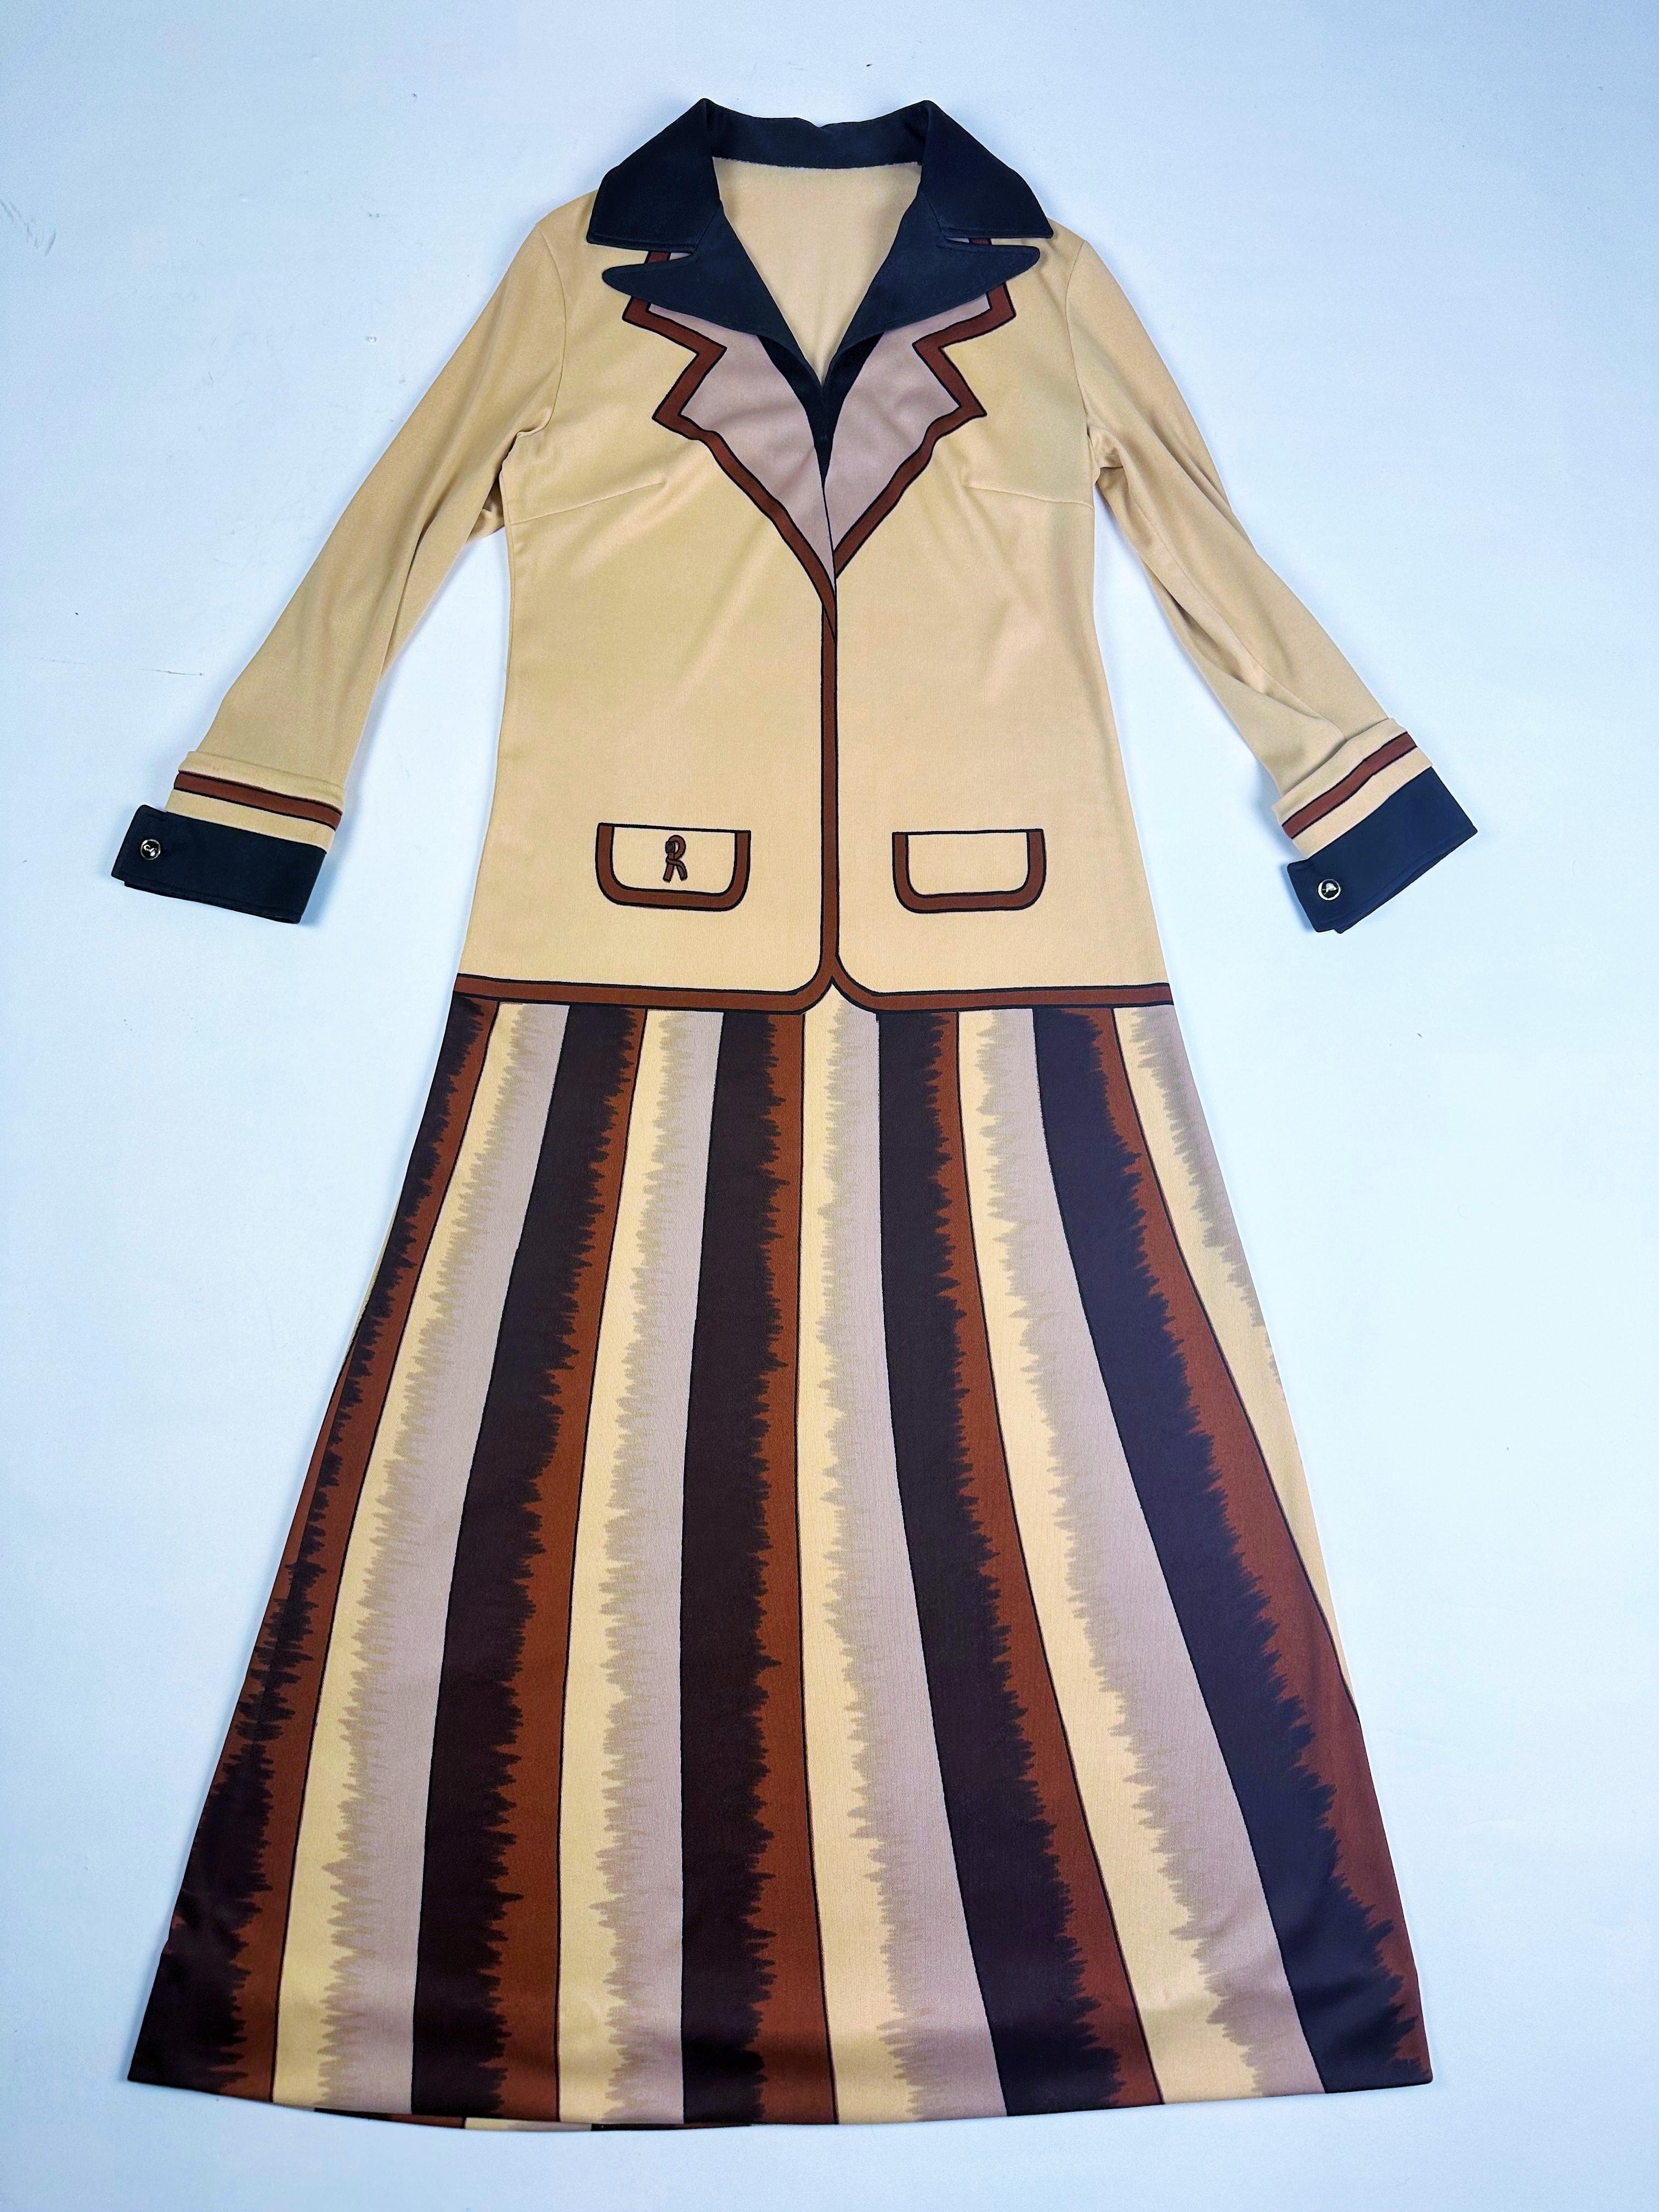 Circa 1975-1980

Italy

Beautiful trompe l'oeil dress by the famous Italian designer Roberta di Camérino. Stretch and fluid straight dress, long sleeves with a V-neckline and folded points. Very fine jersey knit drawing a pleated skirt suit, giving